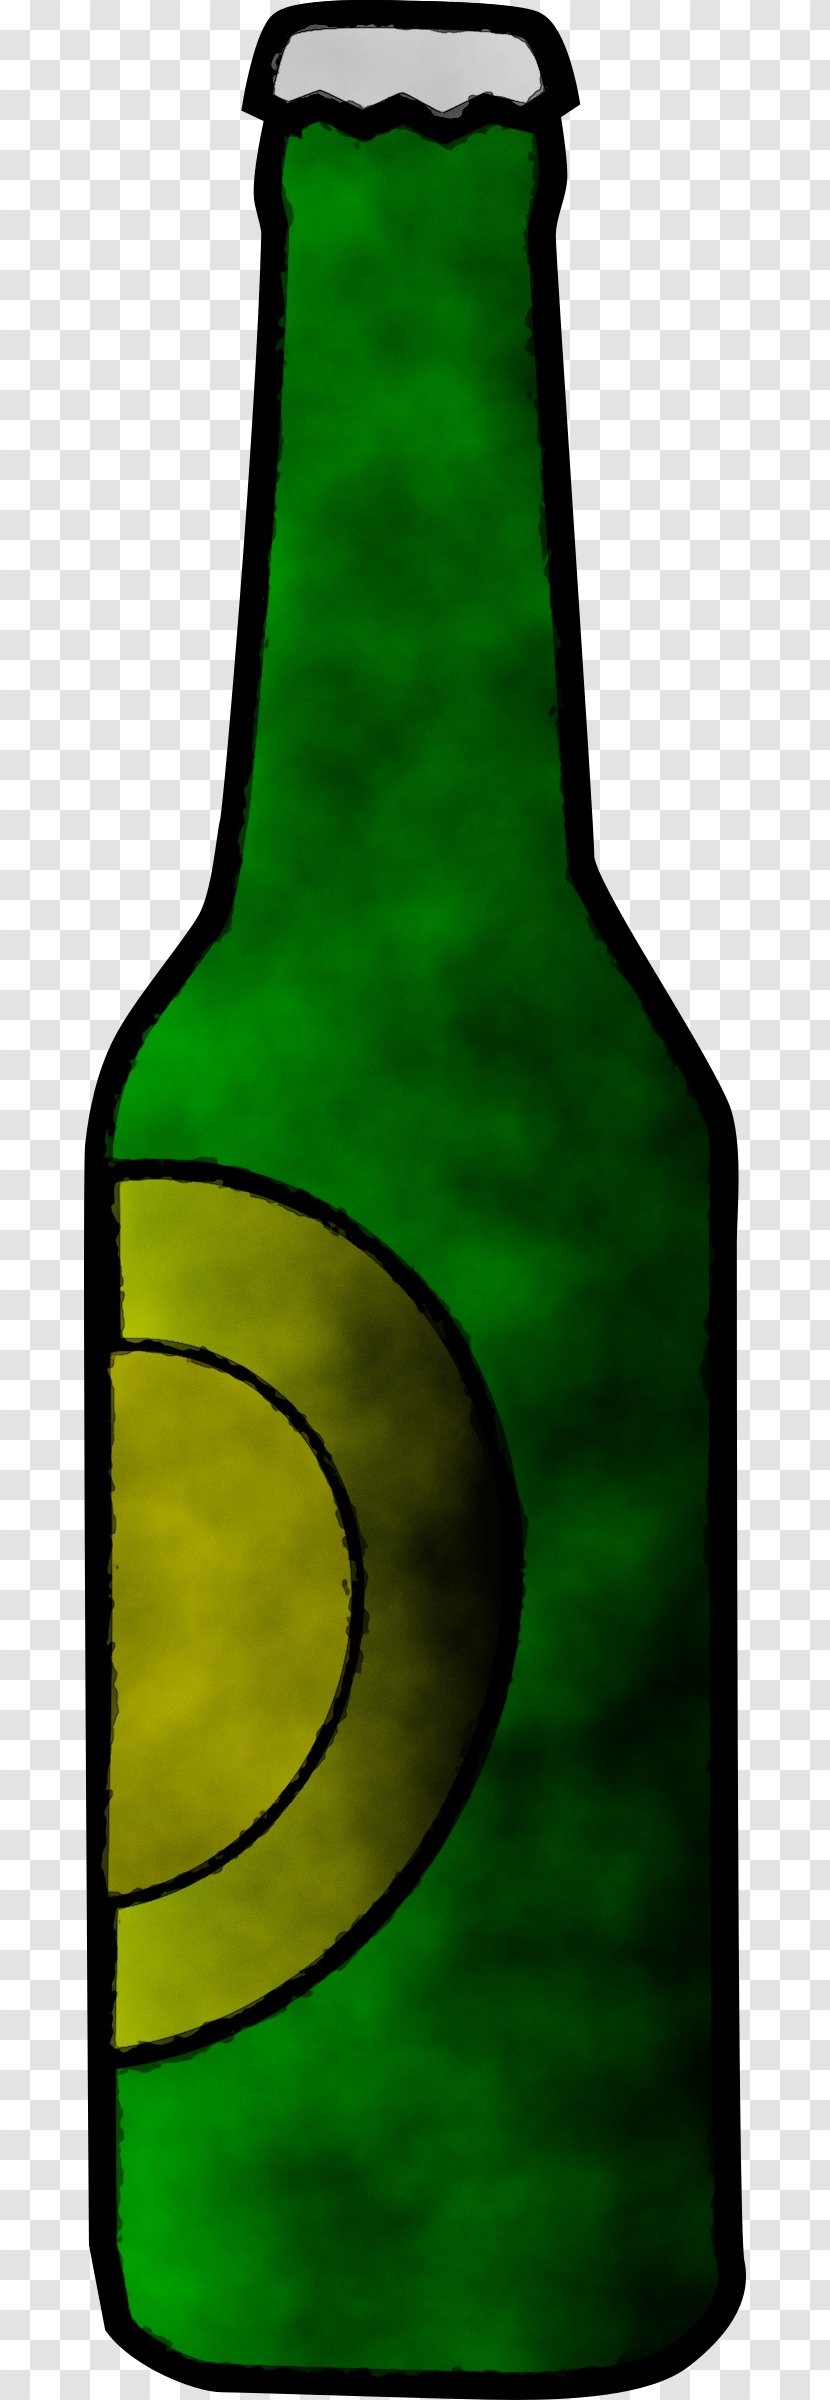 Bottle Green Beer Wine Glass - Home Accessories Transparent PNG